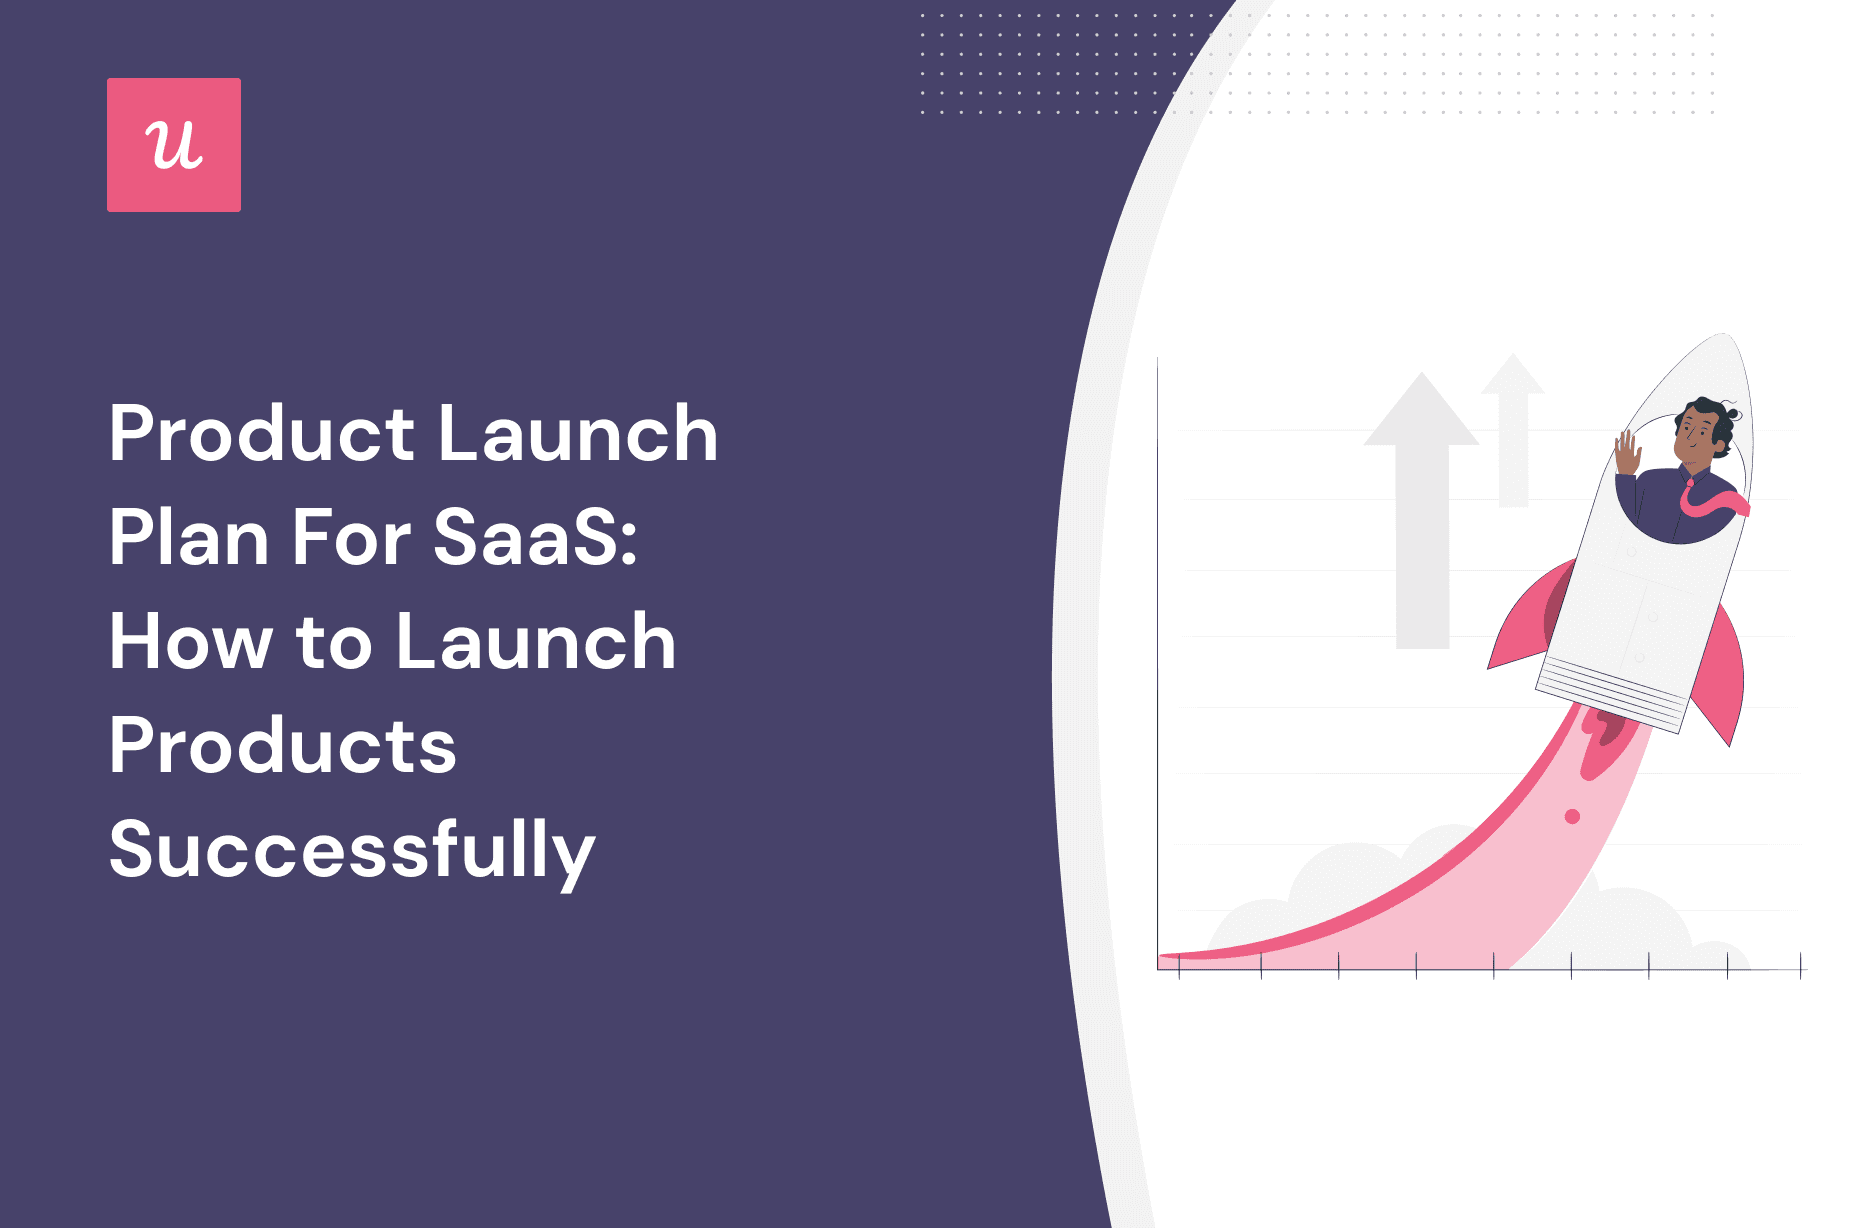 Product Launch Plan For SaaS: How to Launch Products Successfully cover